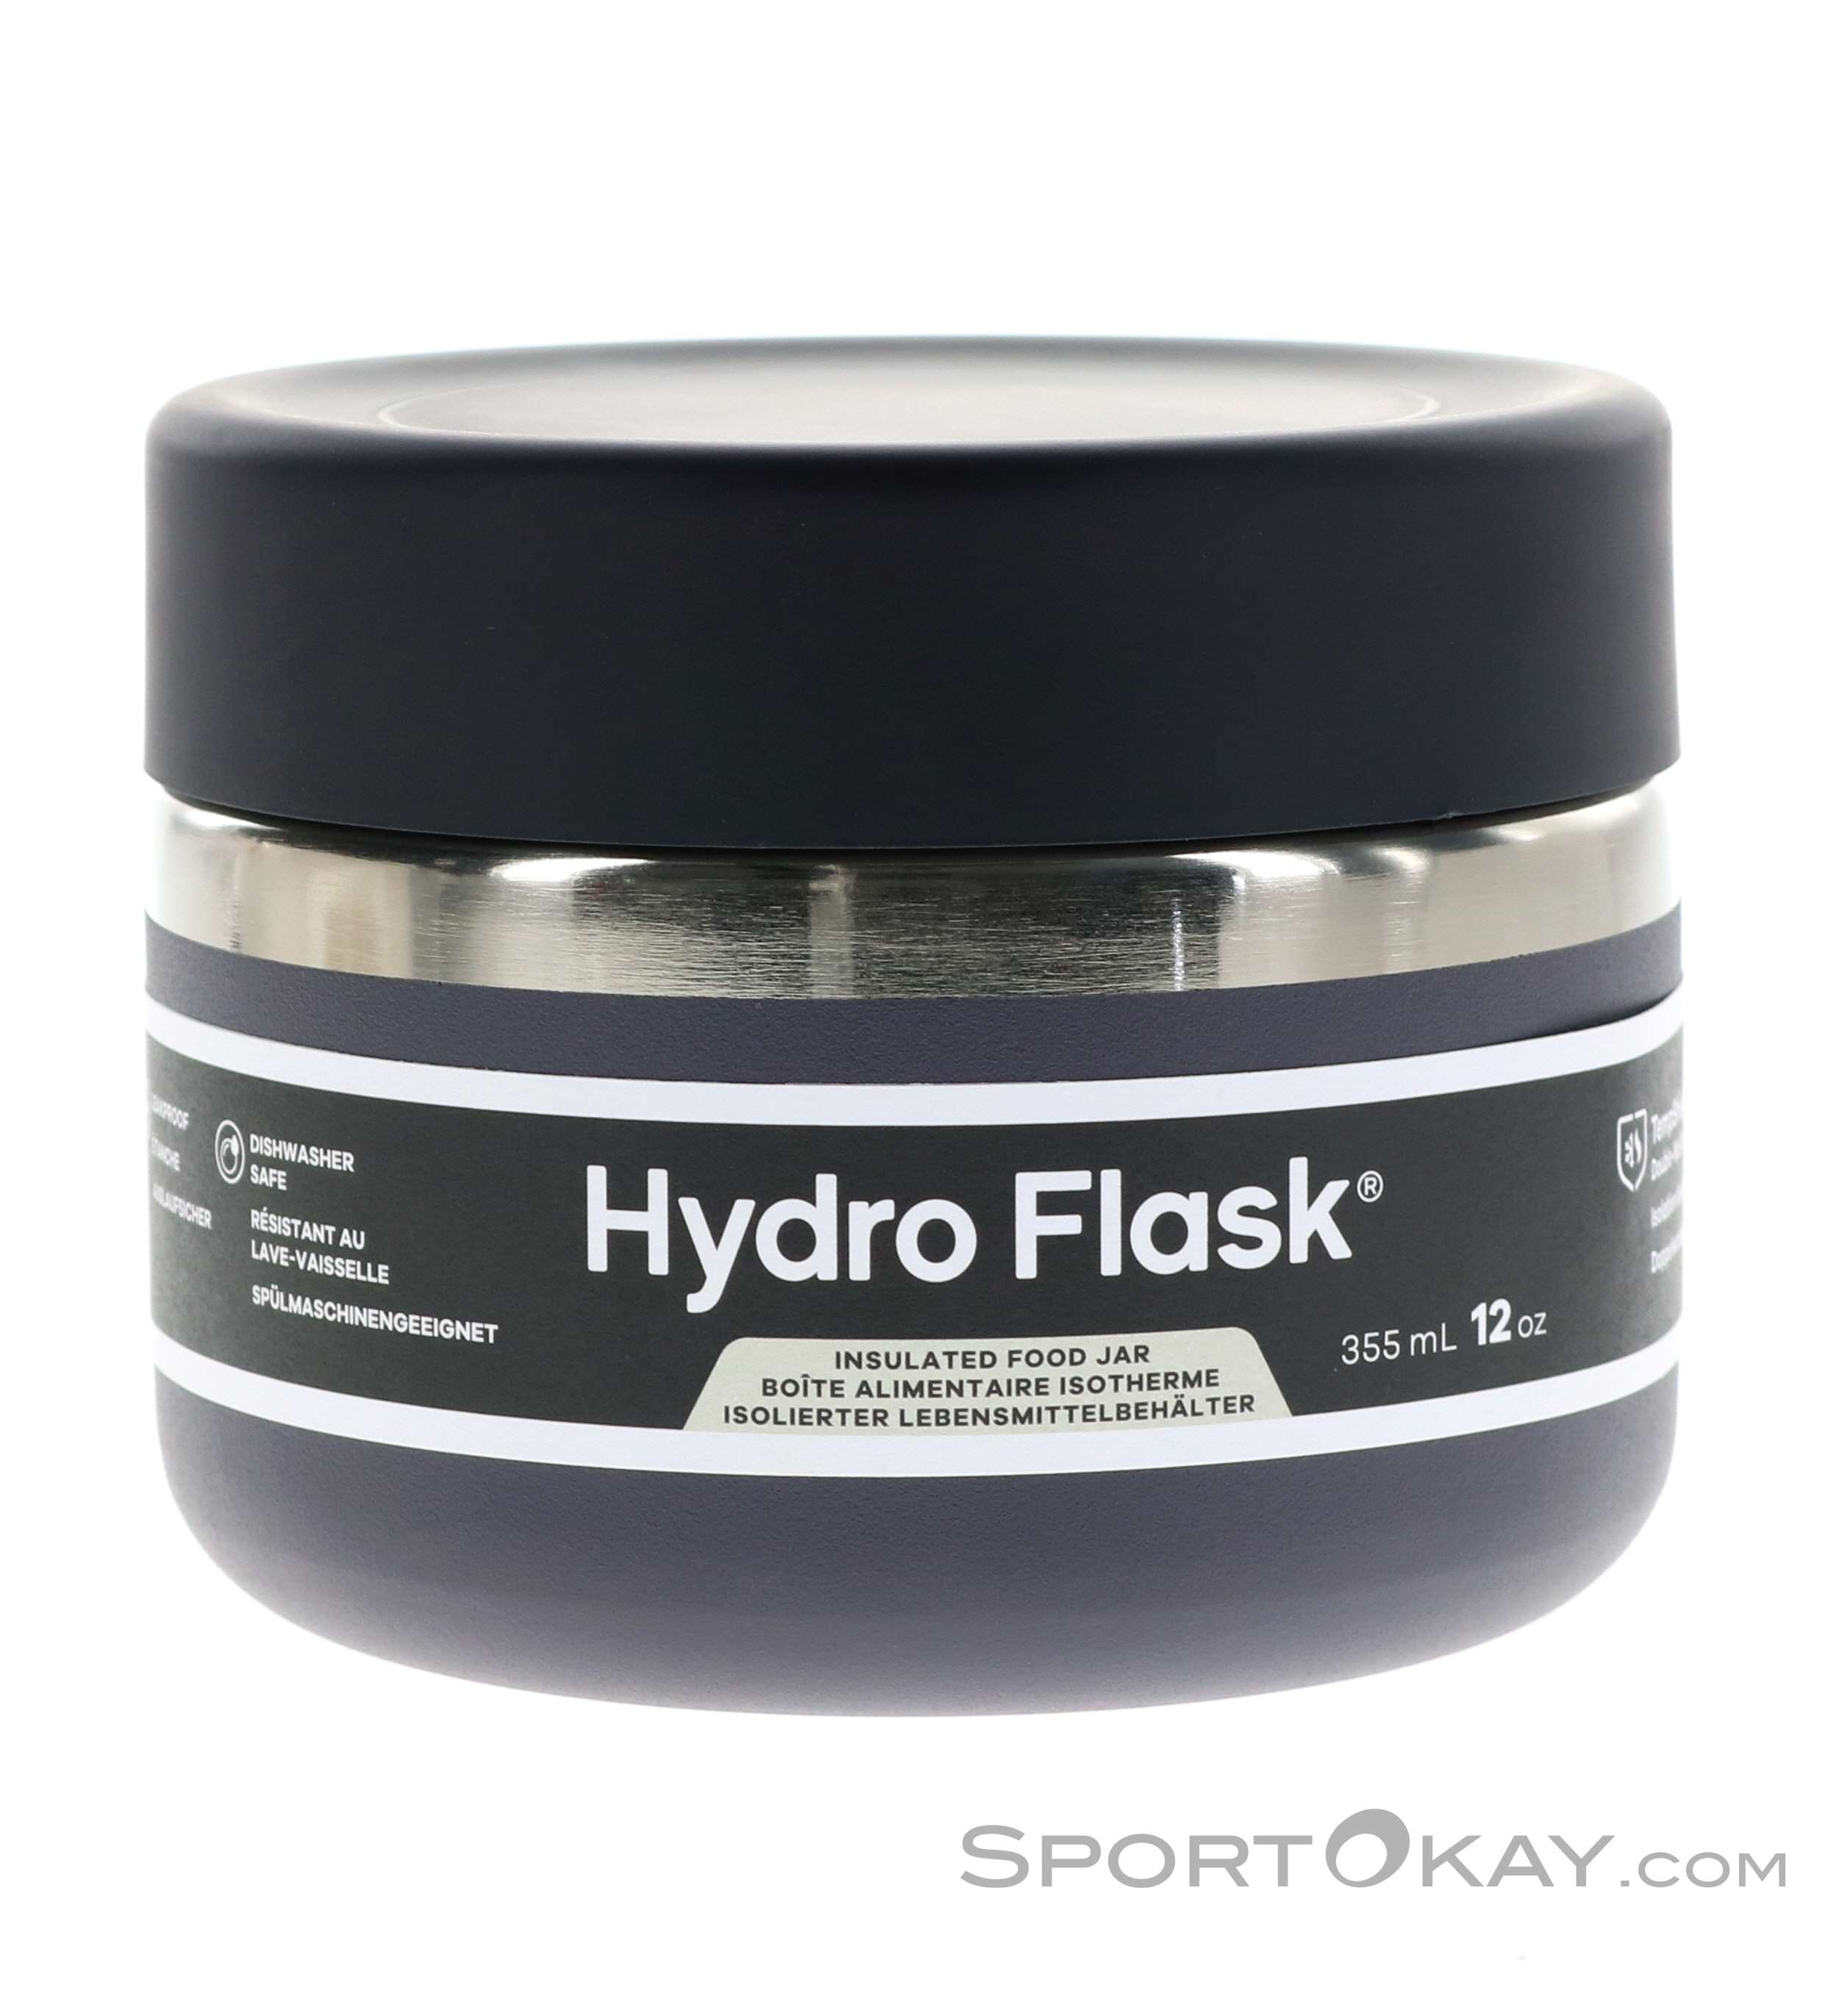 Hydro Flask 12 oz. Insulated Food Jar - Stainless Steel with Leak